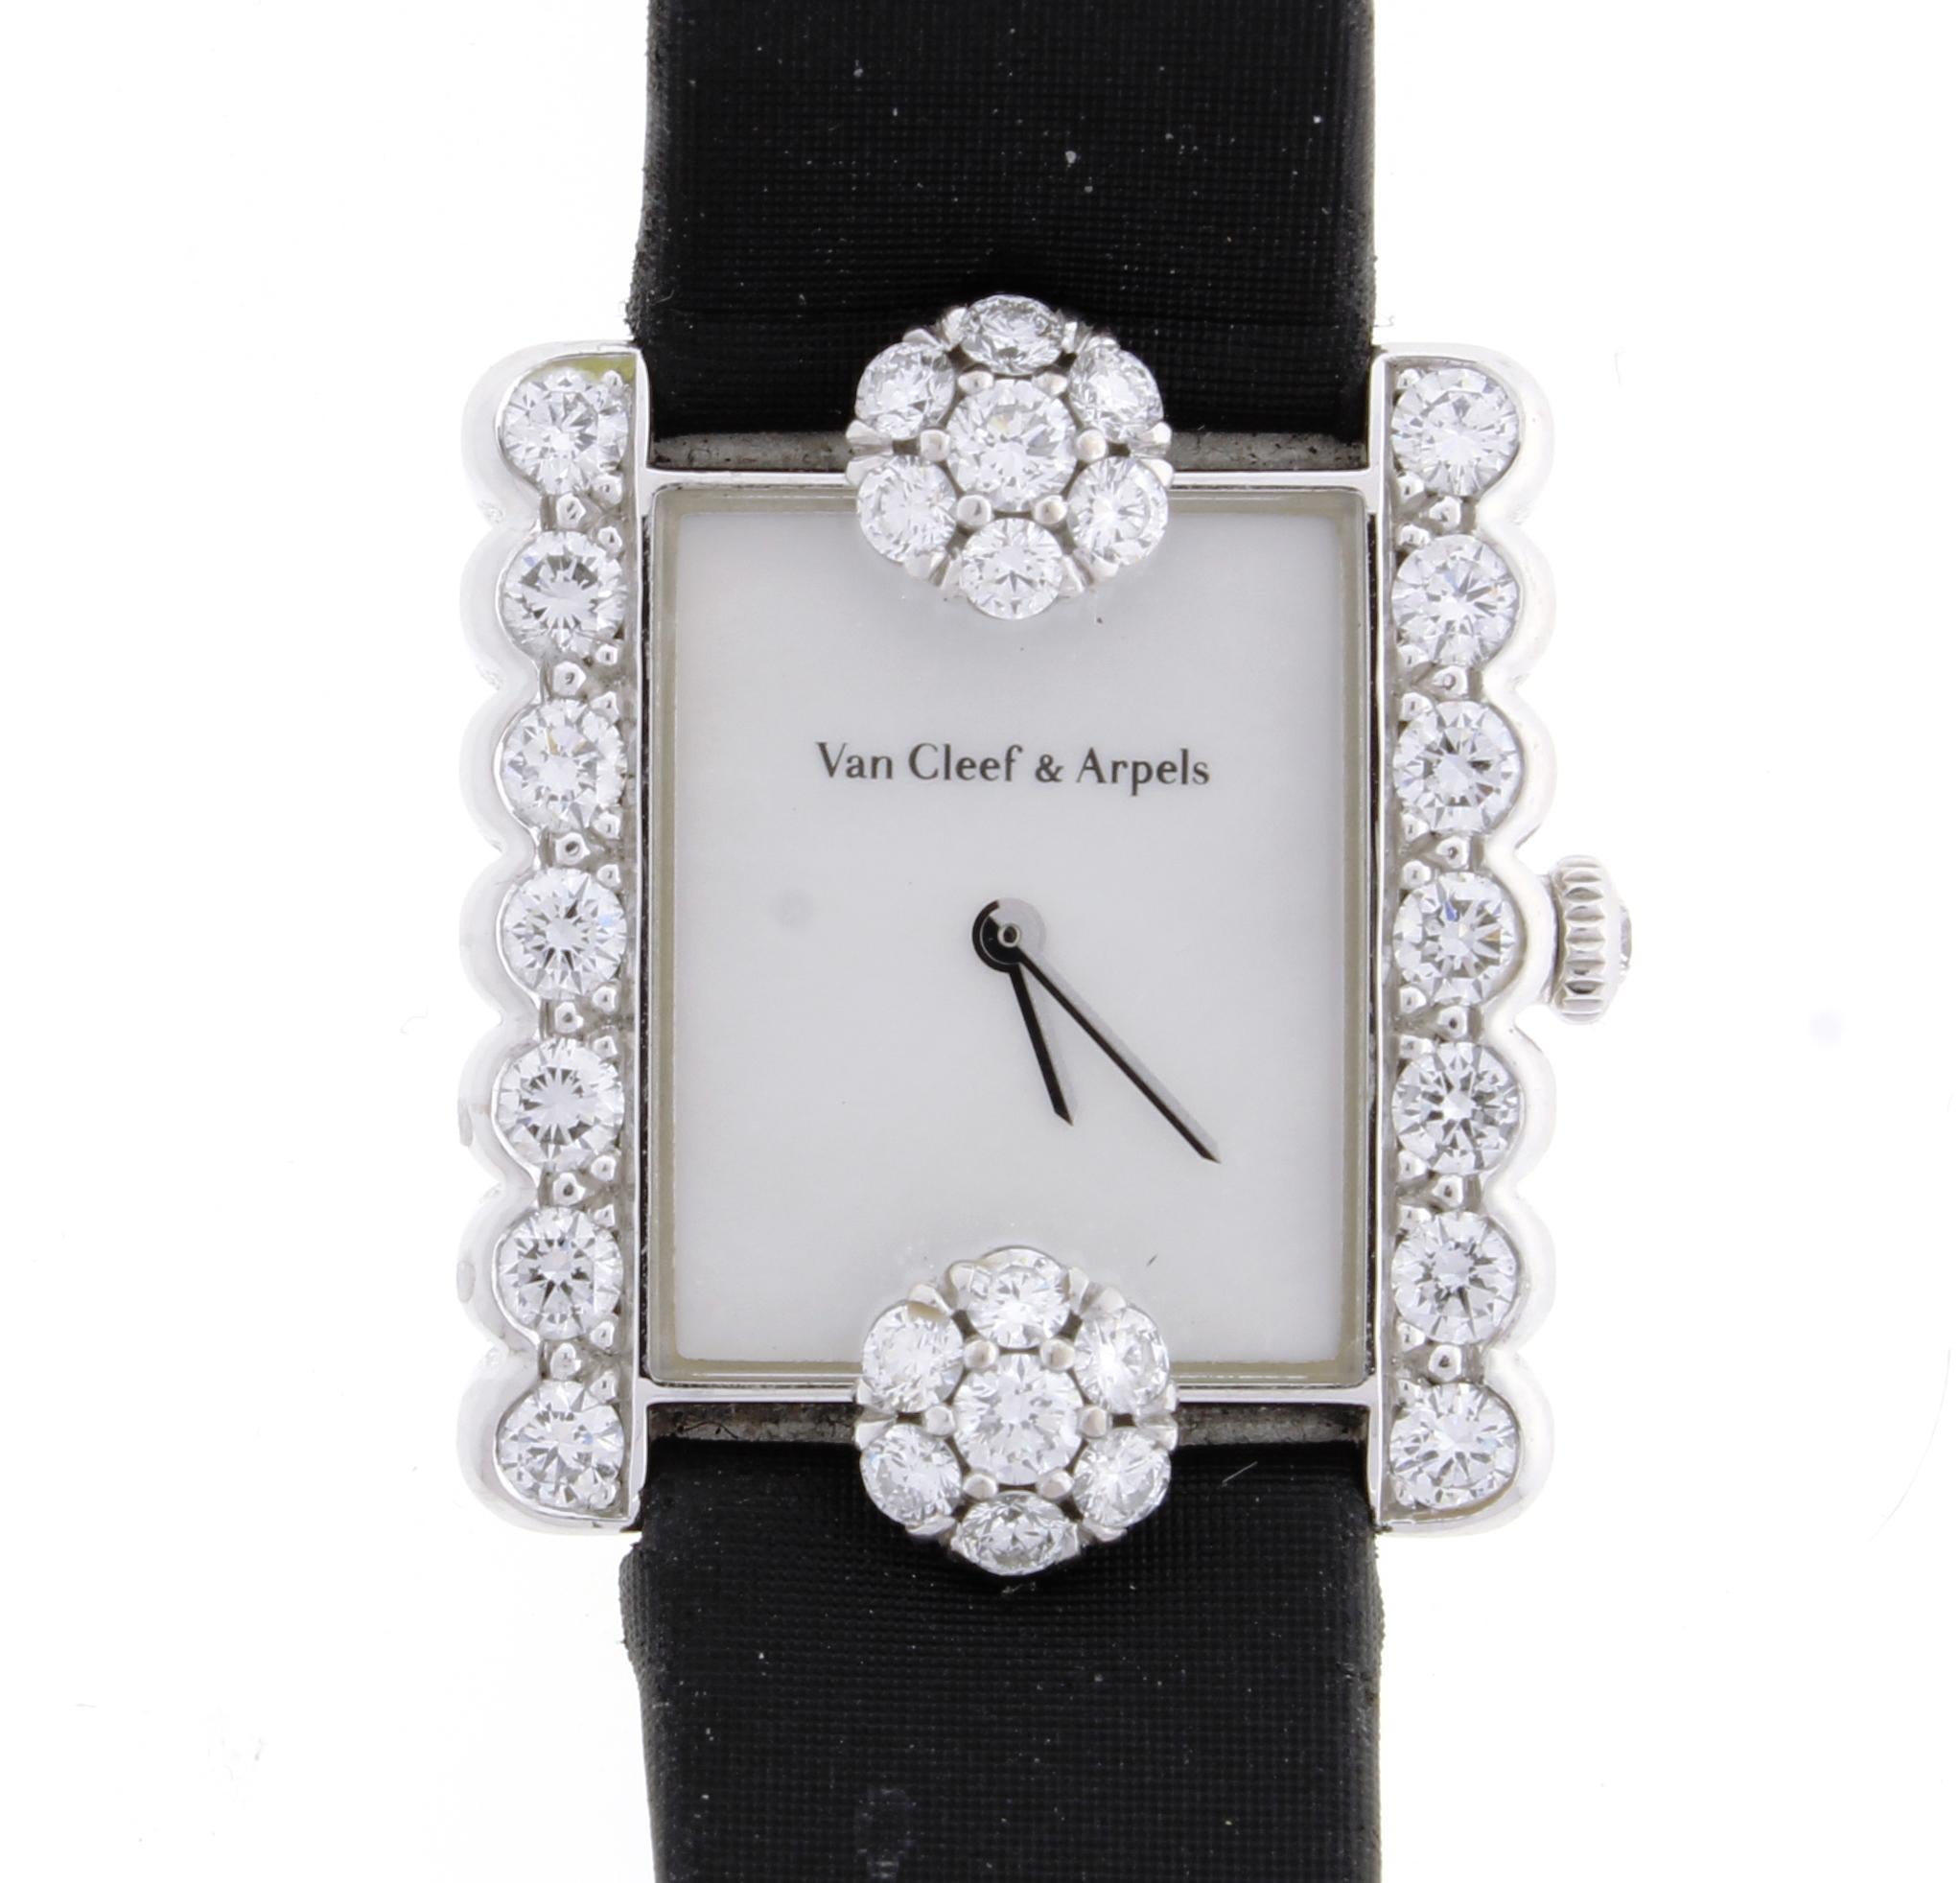 From Van Cleef & Arpels' Fleurette collection, a diamond ladies wrist watch. Two diamond Fleurette motifs adorn the dial at 12 o’clock and 6 o’clock, and a black satin strap enhances the refinement of the watch.
Metal 18 karat white gold
25